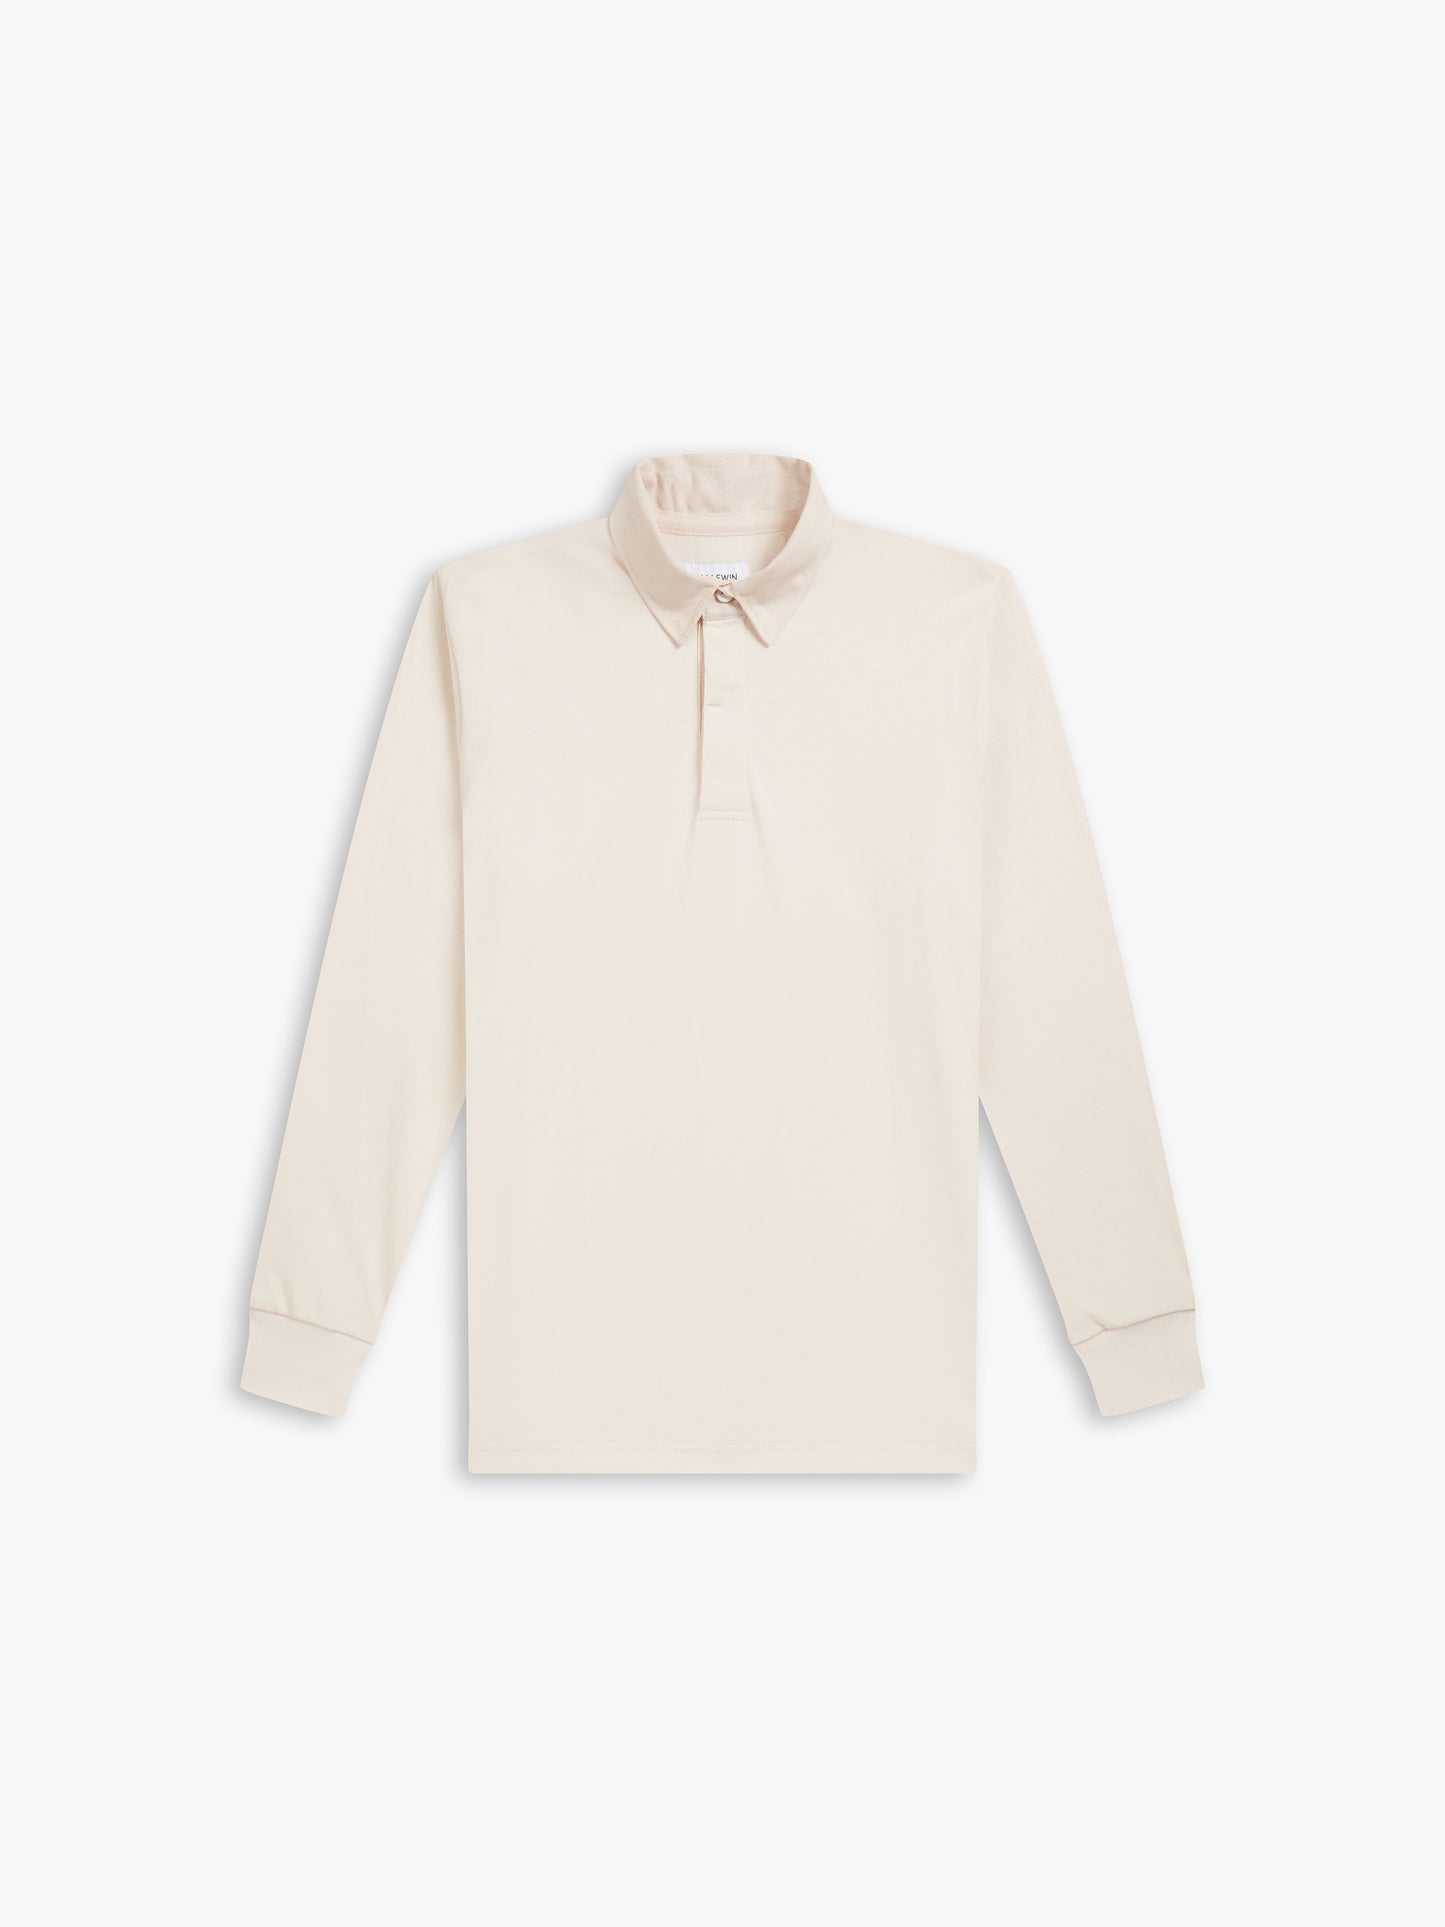 Cotton Rugby Shirt in Off-White